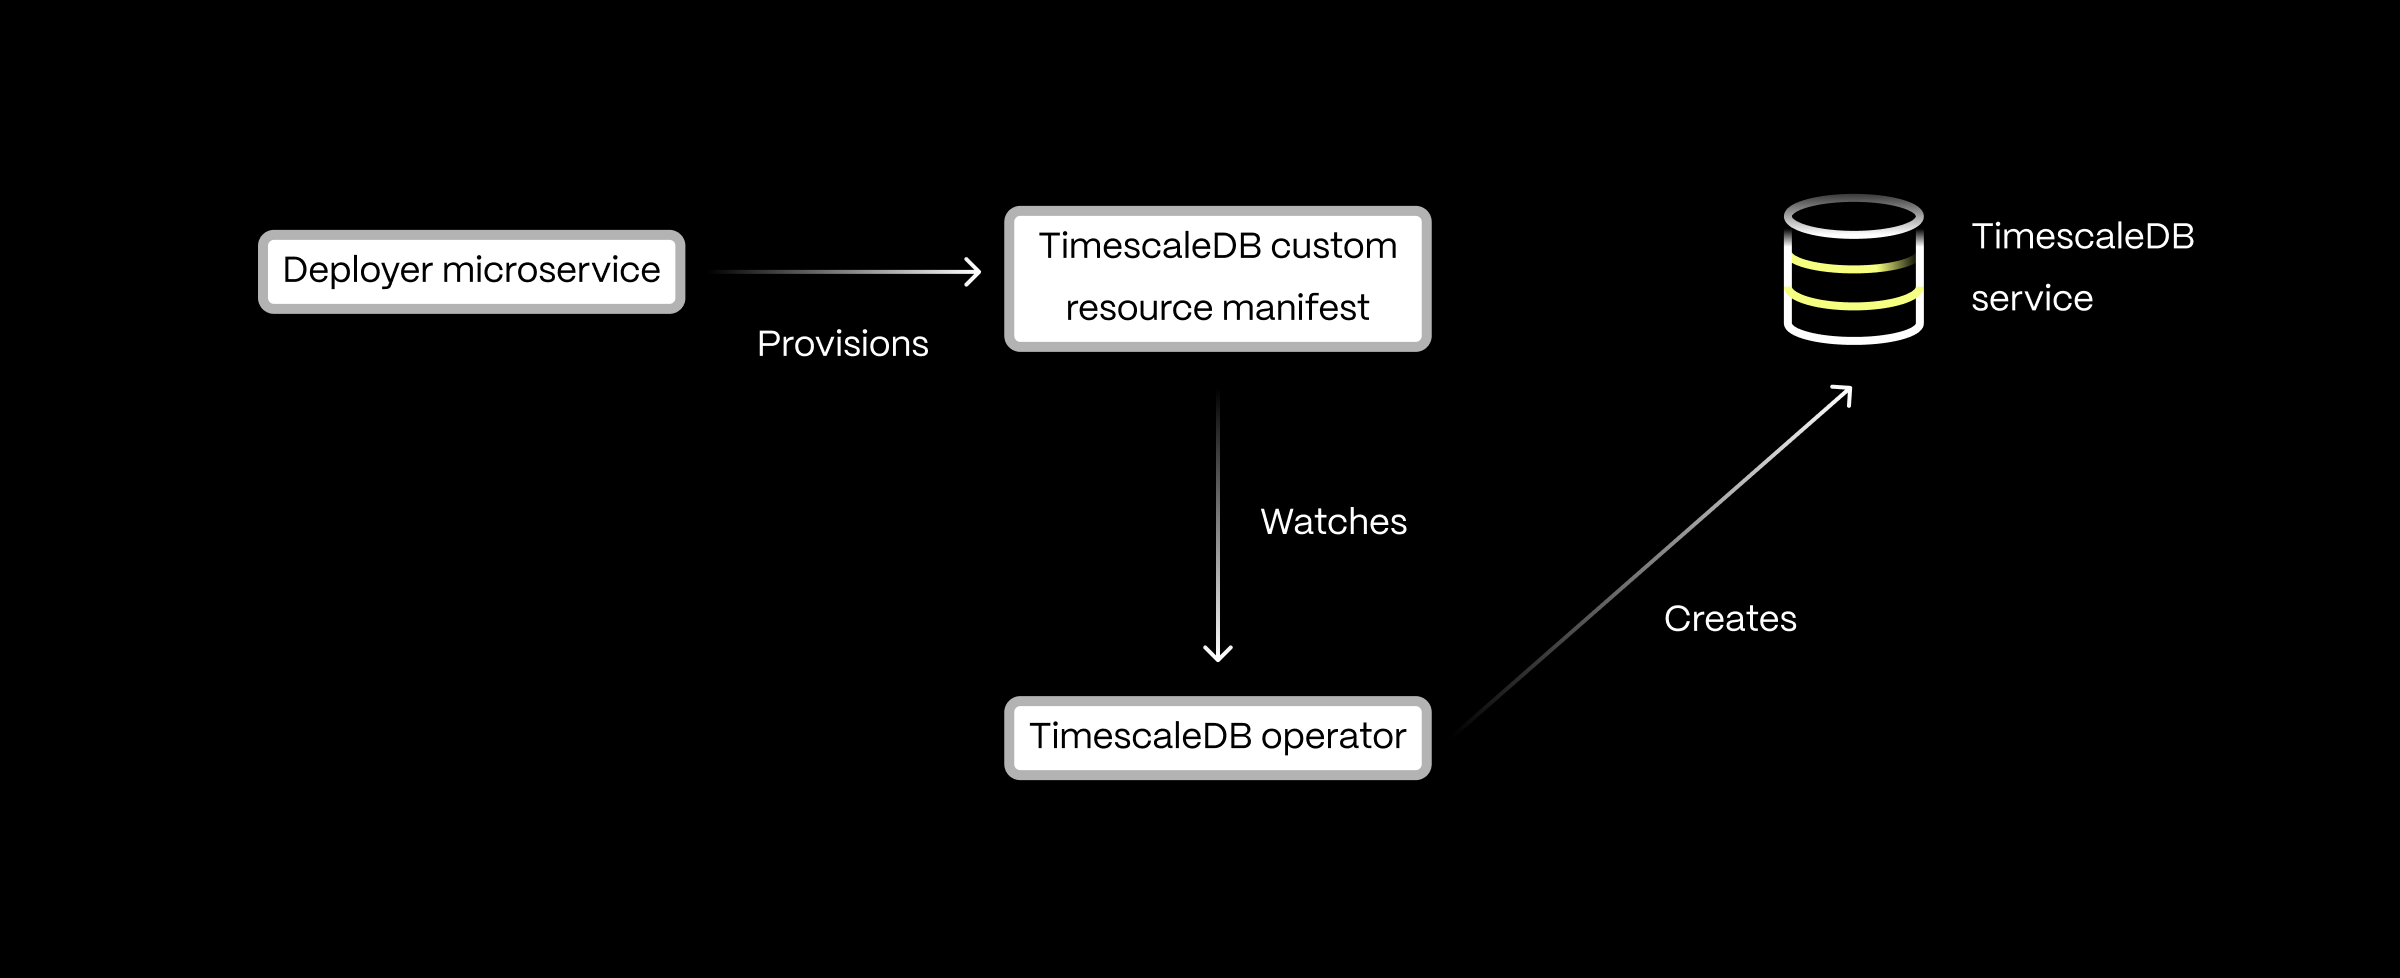 Architecture diagram illustrating the process of deploying a TimescaleDB service in Kubernetes.